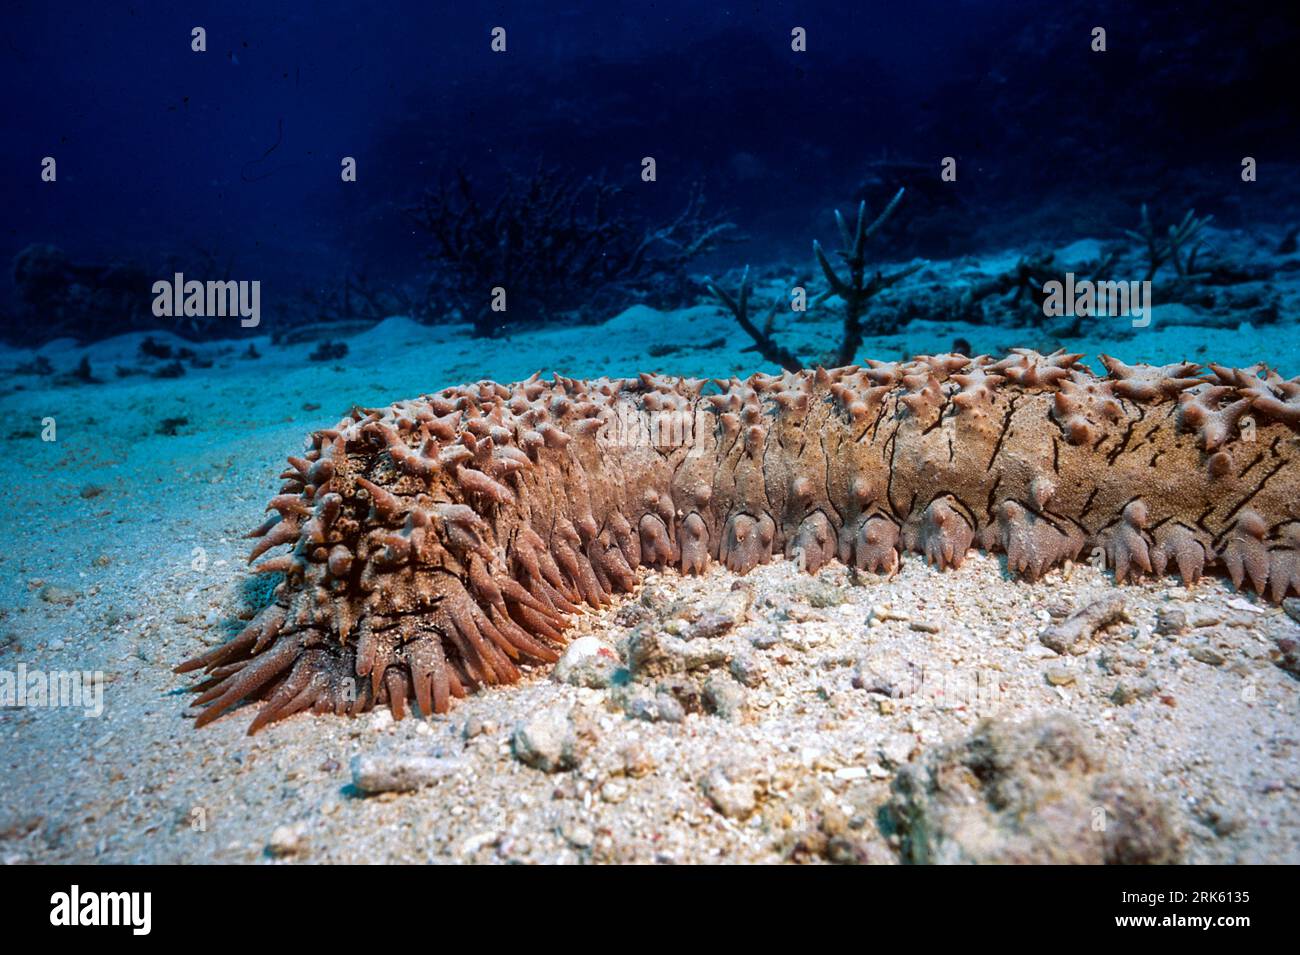 The endangered pinapple sea cucumber (Telenota ananas) from Agincourt reef, Great Barrier Reef, Australia. Stock Photo